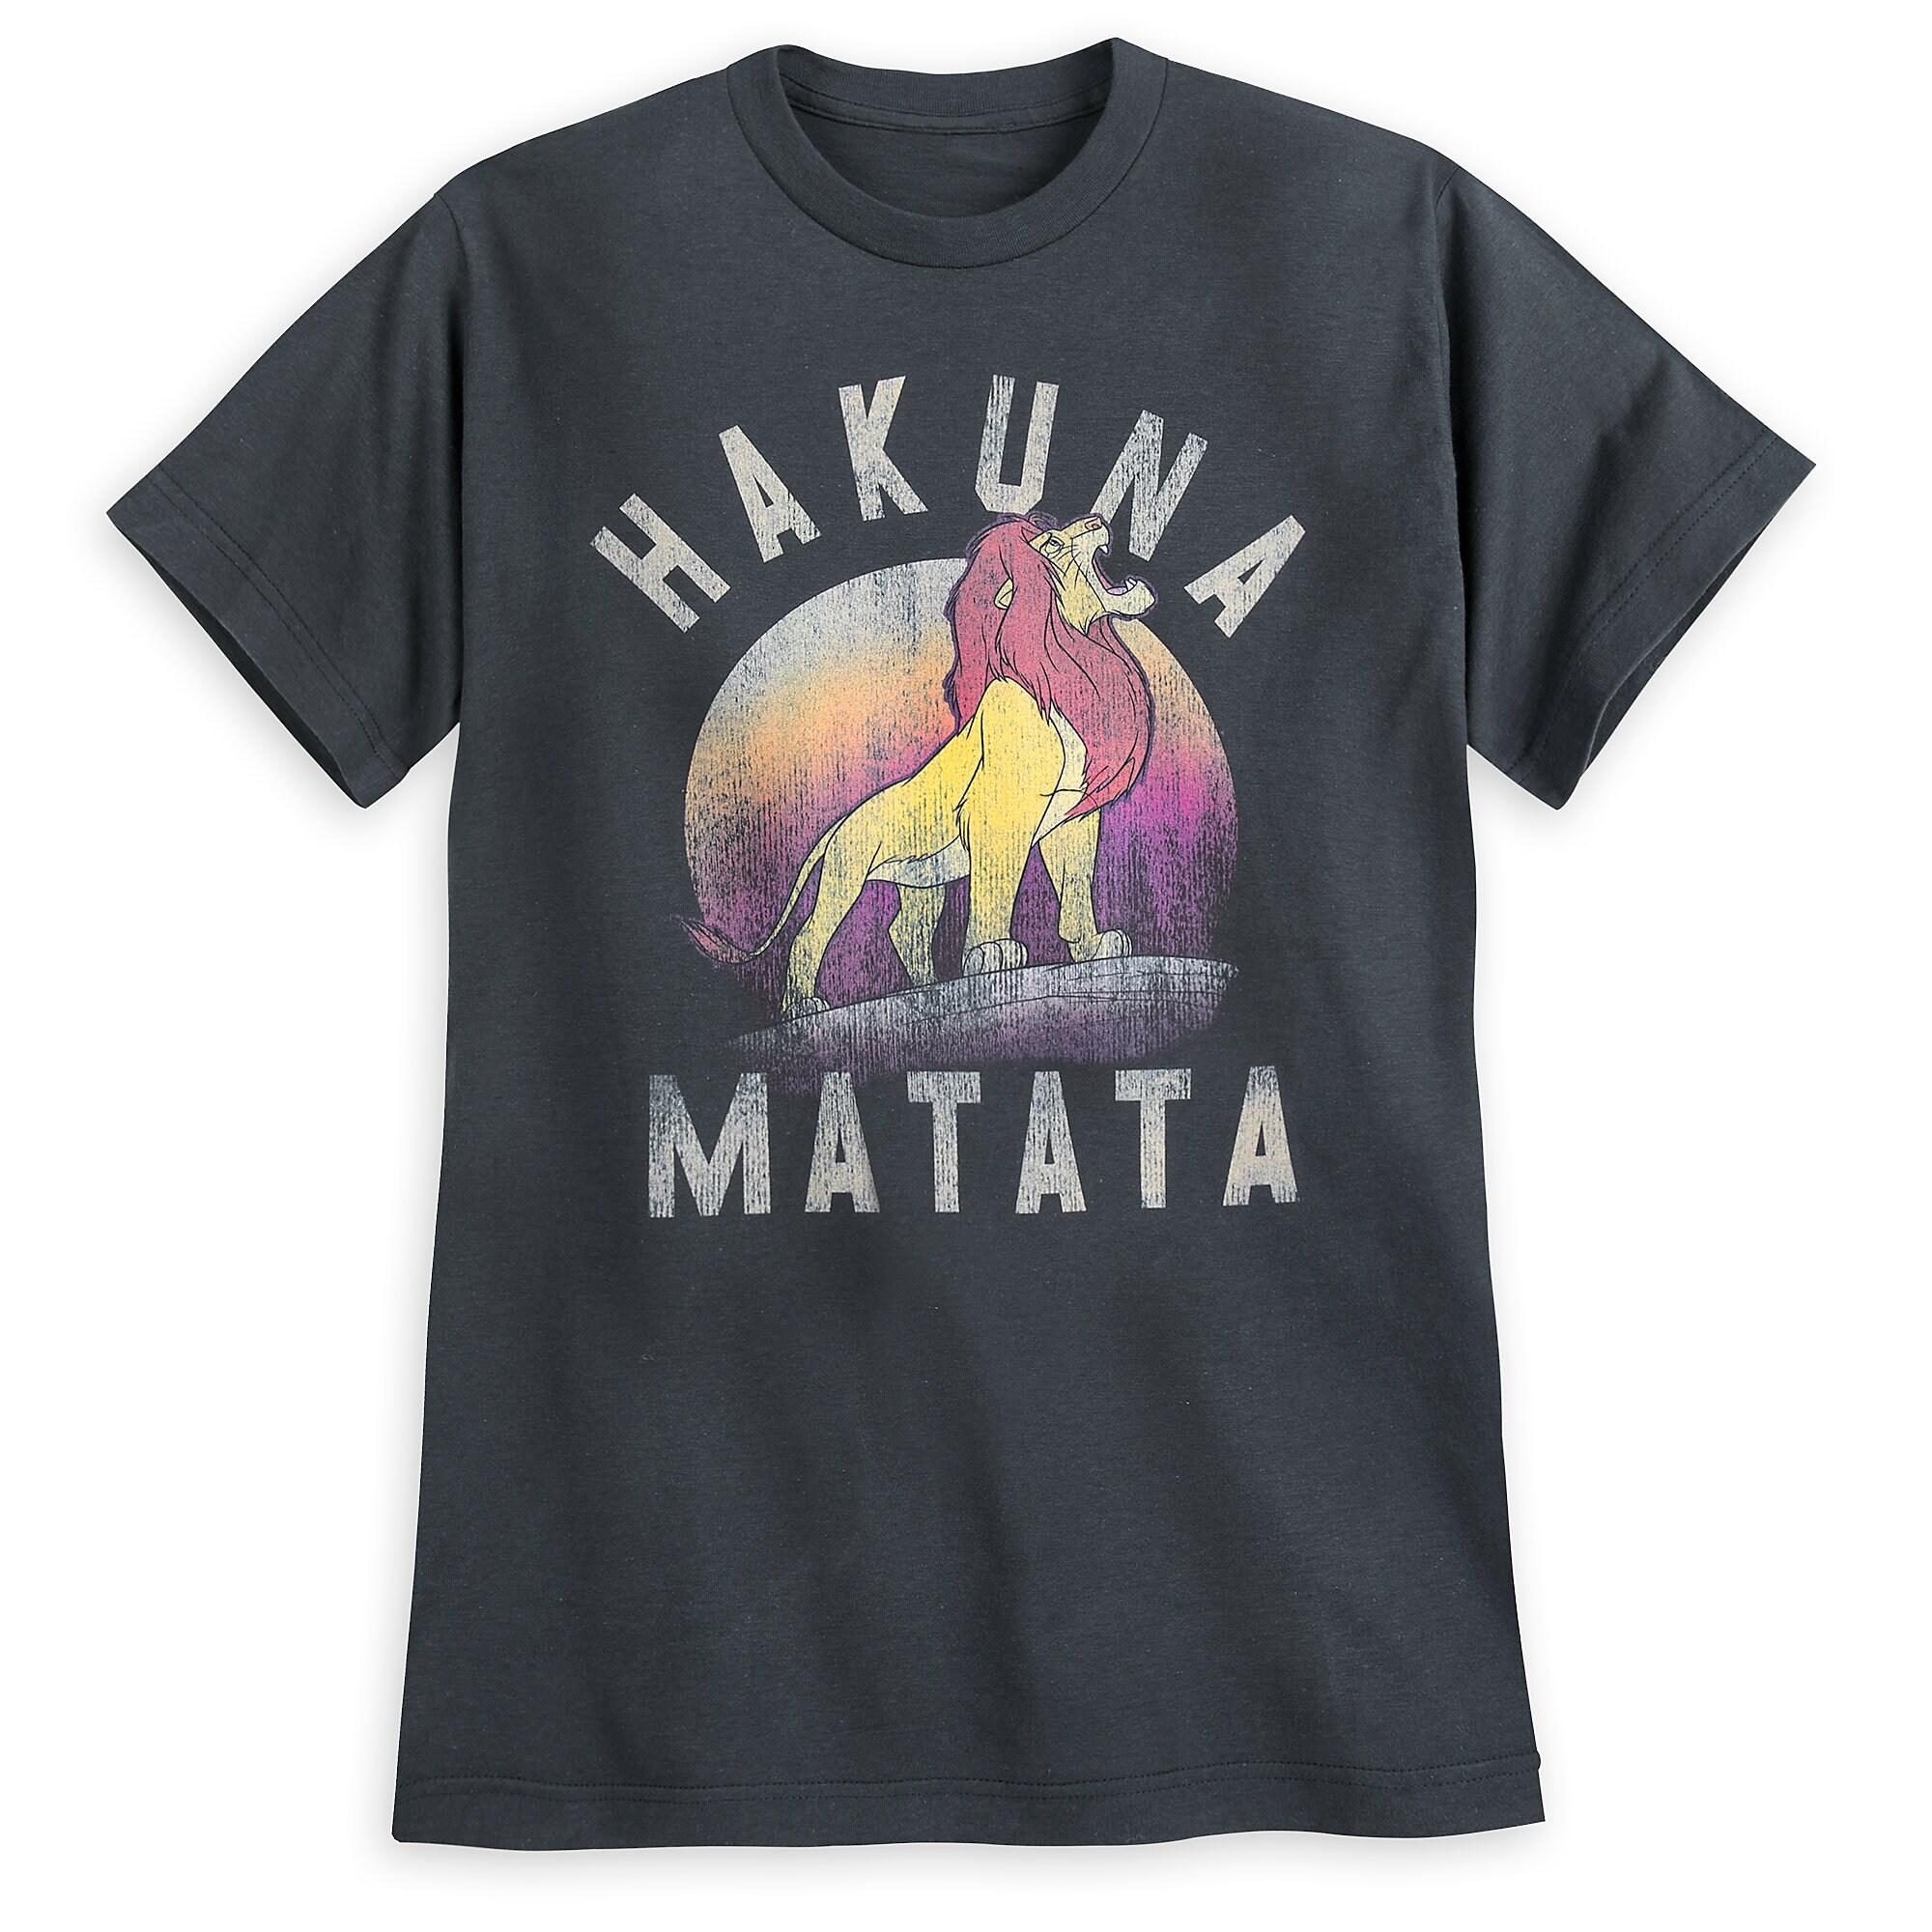 Mufasa T-Shirt for Men - The Lion King has hit the shelves for purchase ...